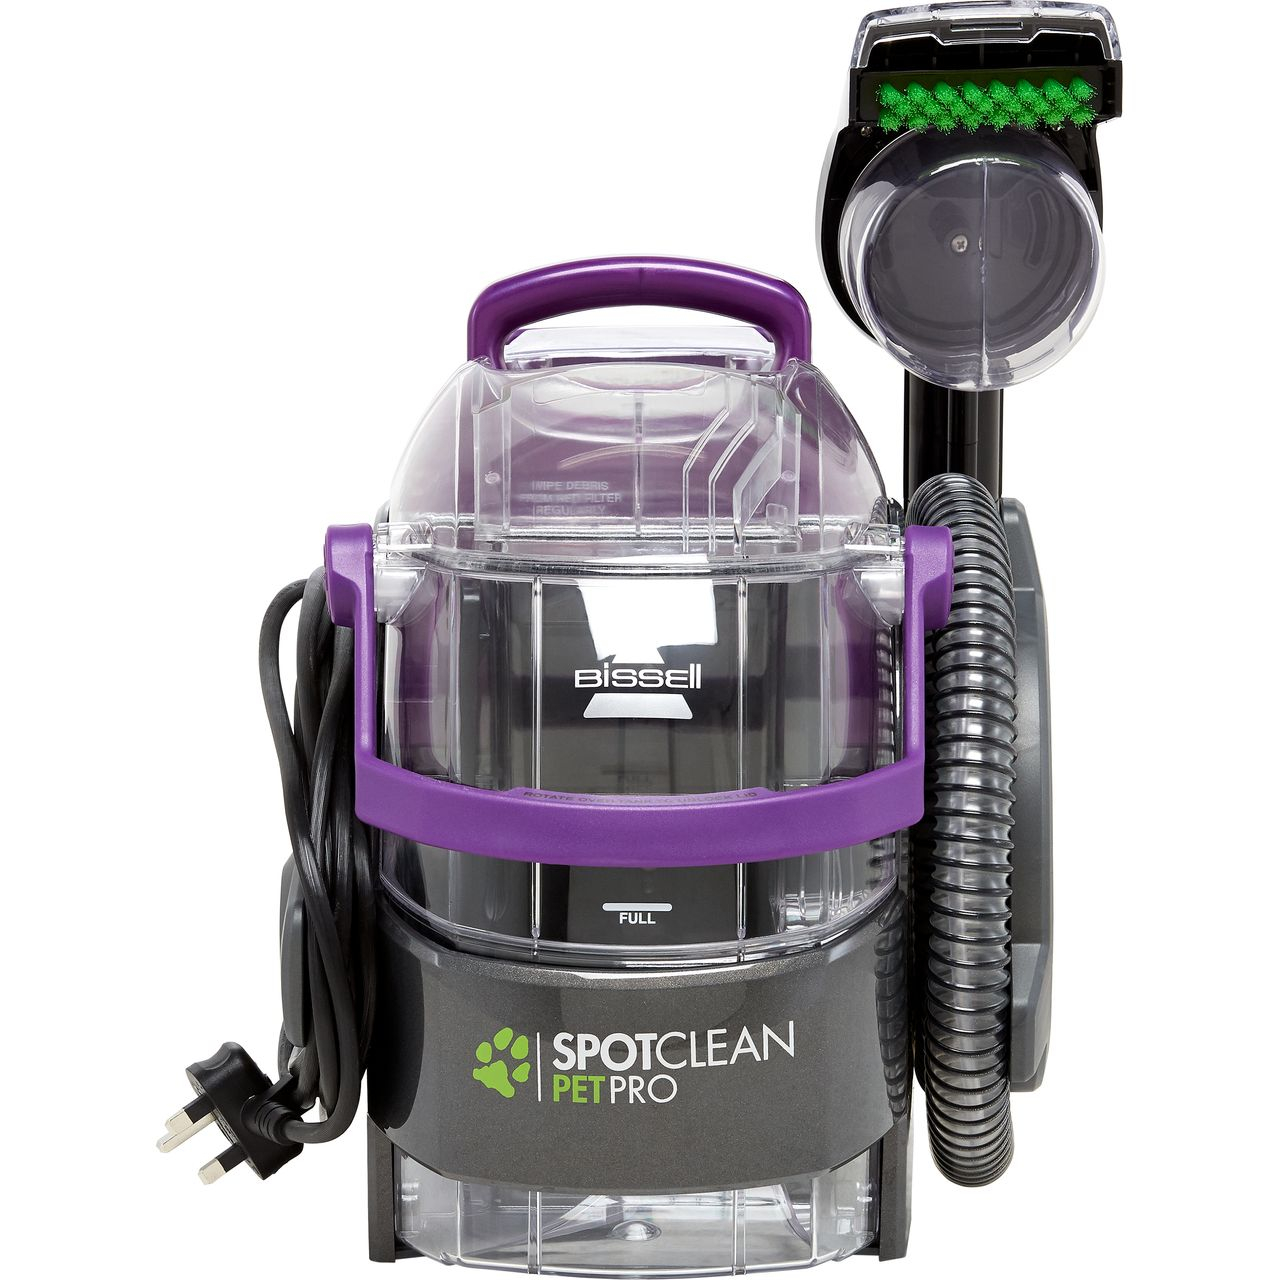 Bissell SpotClean Pet Pro 15588 Carpet Cleaner £129.00 AO (free delivery) UK Mainland hotukdeals